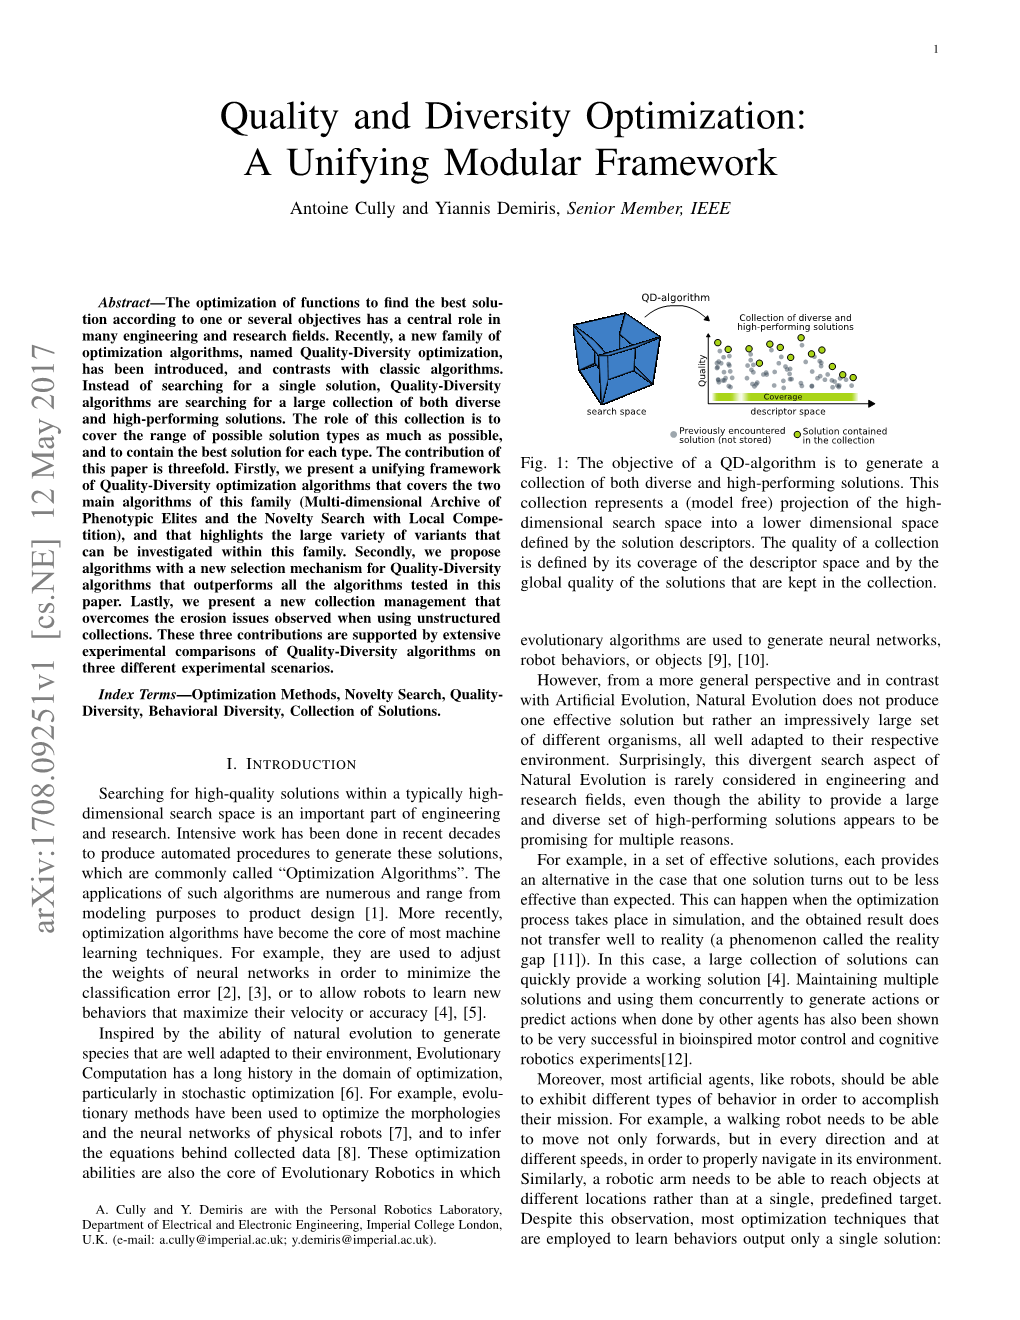 Quality and Diversity Optimization: a Unifying Modular Framework Antoine Cully and Yiannis Demiris, Senior Member, IEEE